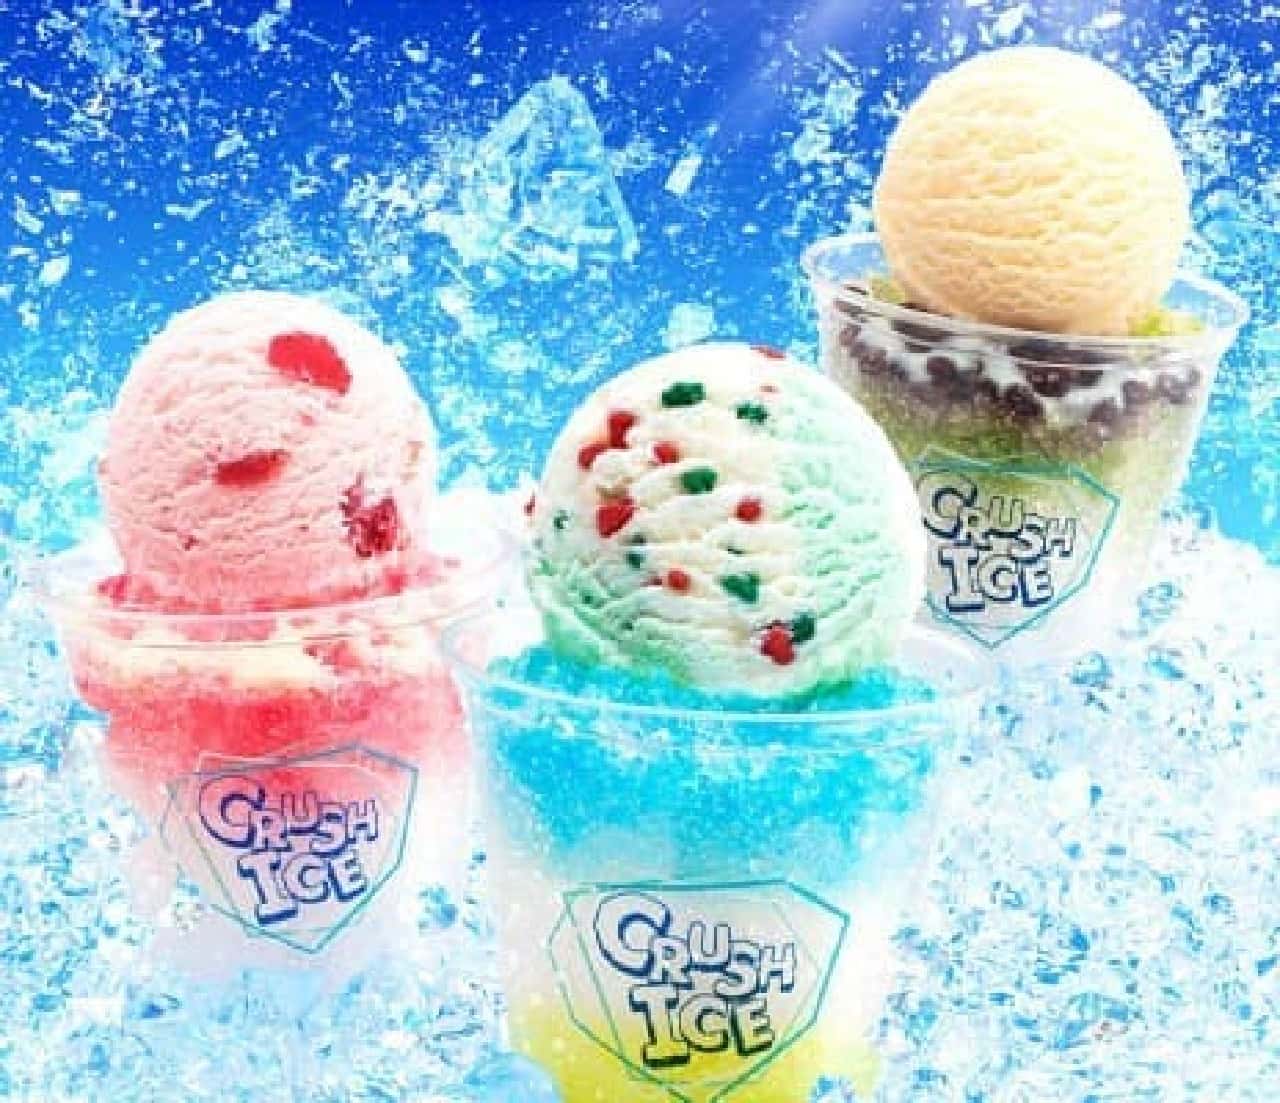 Enjoy shaved ice and ice cream at the same time!